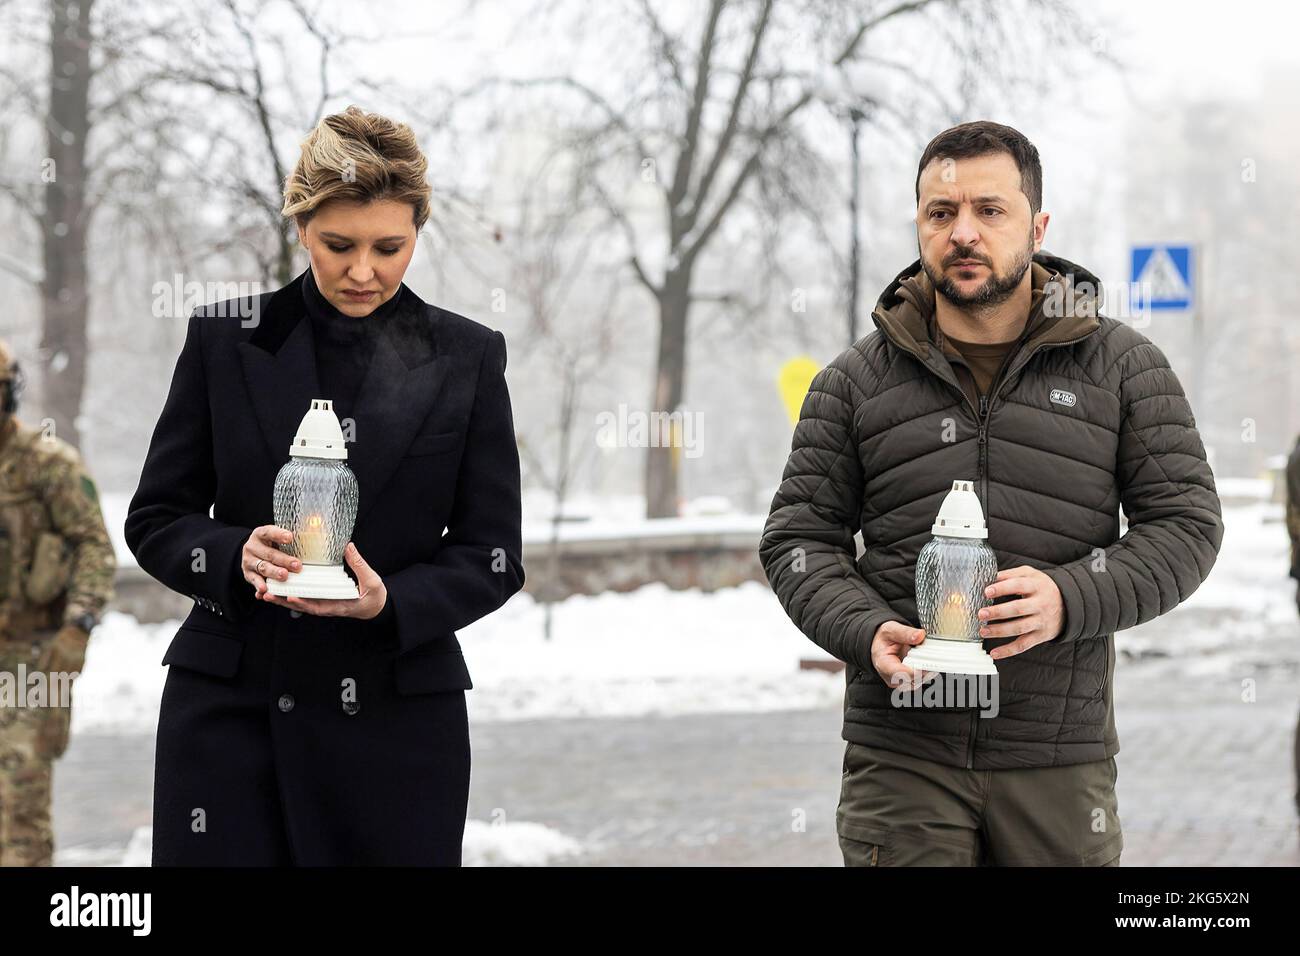 Ukraine President Volodymyr Zelensky and First Lady Olena Zelenska honored the memory of the fallen participants of the Revolution of Dignity. On the Day of Dignity and Freedom, President of Ukraine Volodymyr Zelenskyy together with his wife Olena honored the memory of the activists perished during the Revolution of Dignity.  The presidential couple placed icon lamps near the cross on the Alley of Heroes of the Heavenly Hundred in Kyiv. Stock Photo